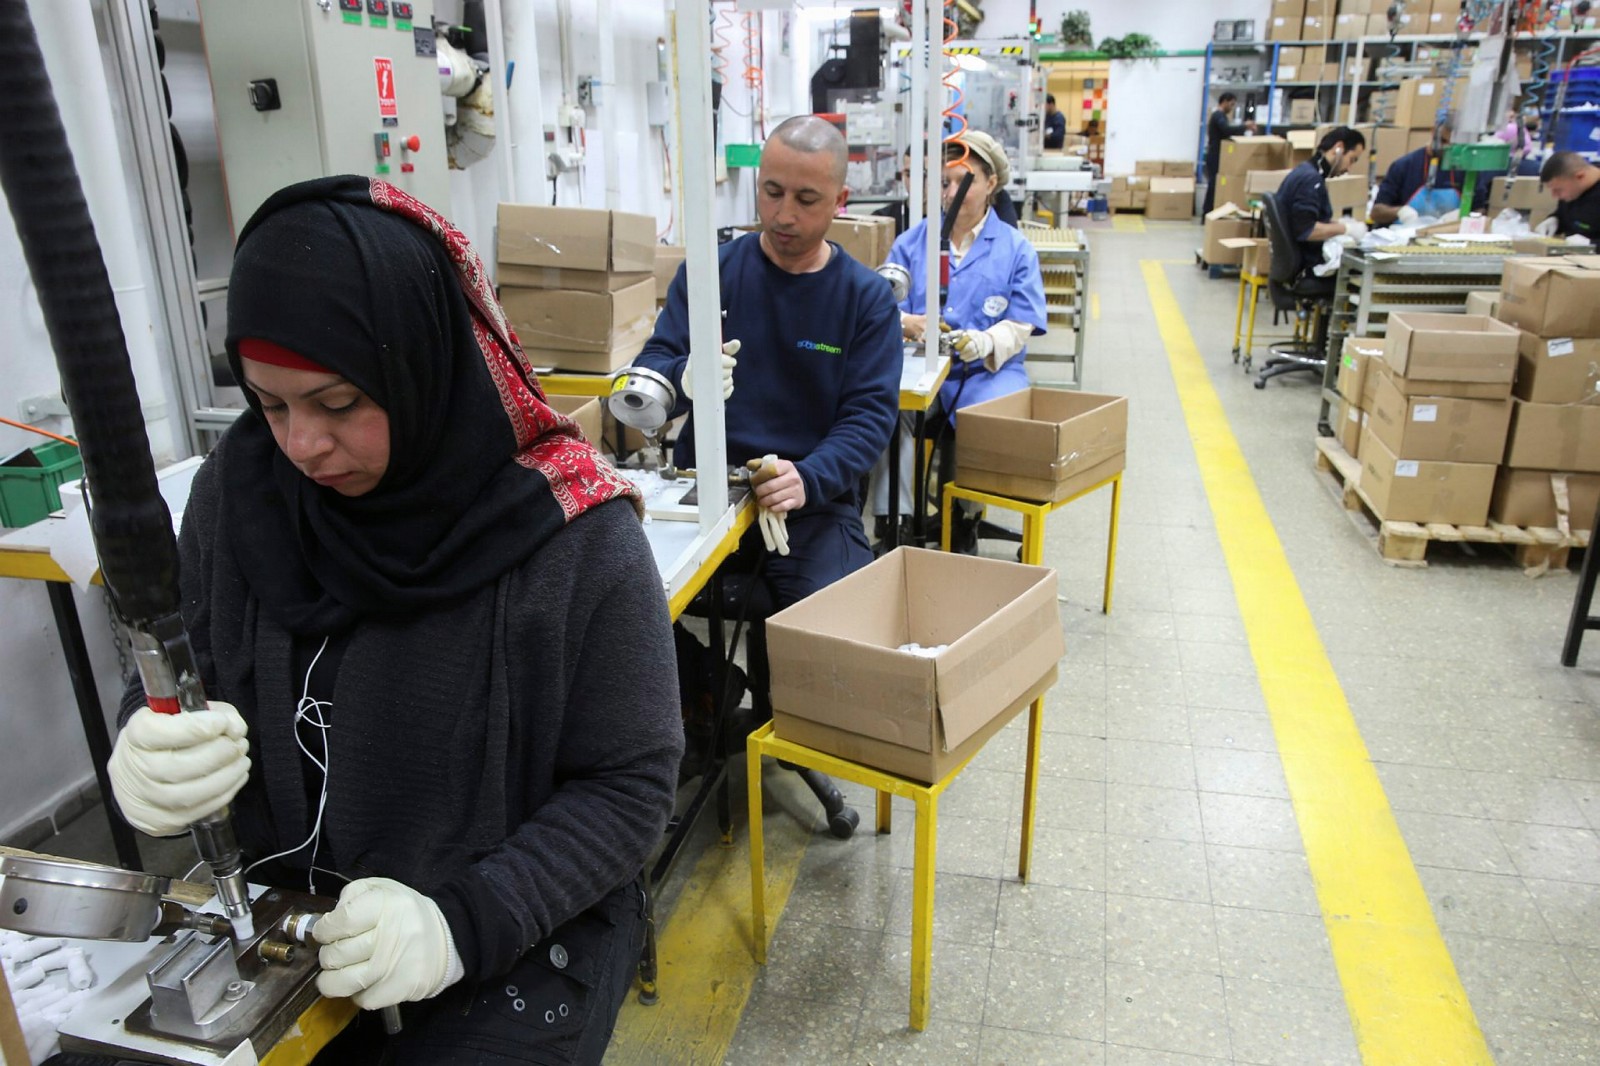 Palestinians and Jews  working together at the former SodaStream factory in Maale Adumim. Photo by Nati Shohat/Flash90